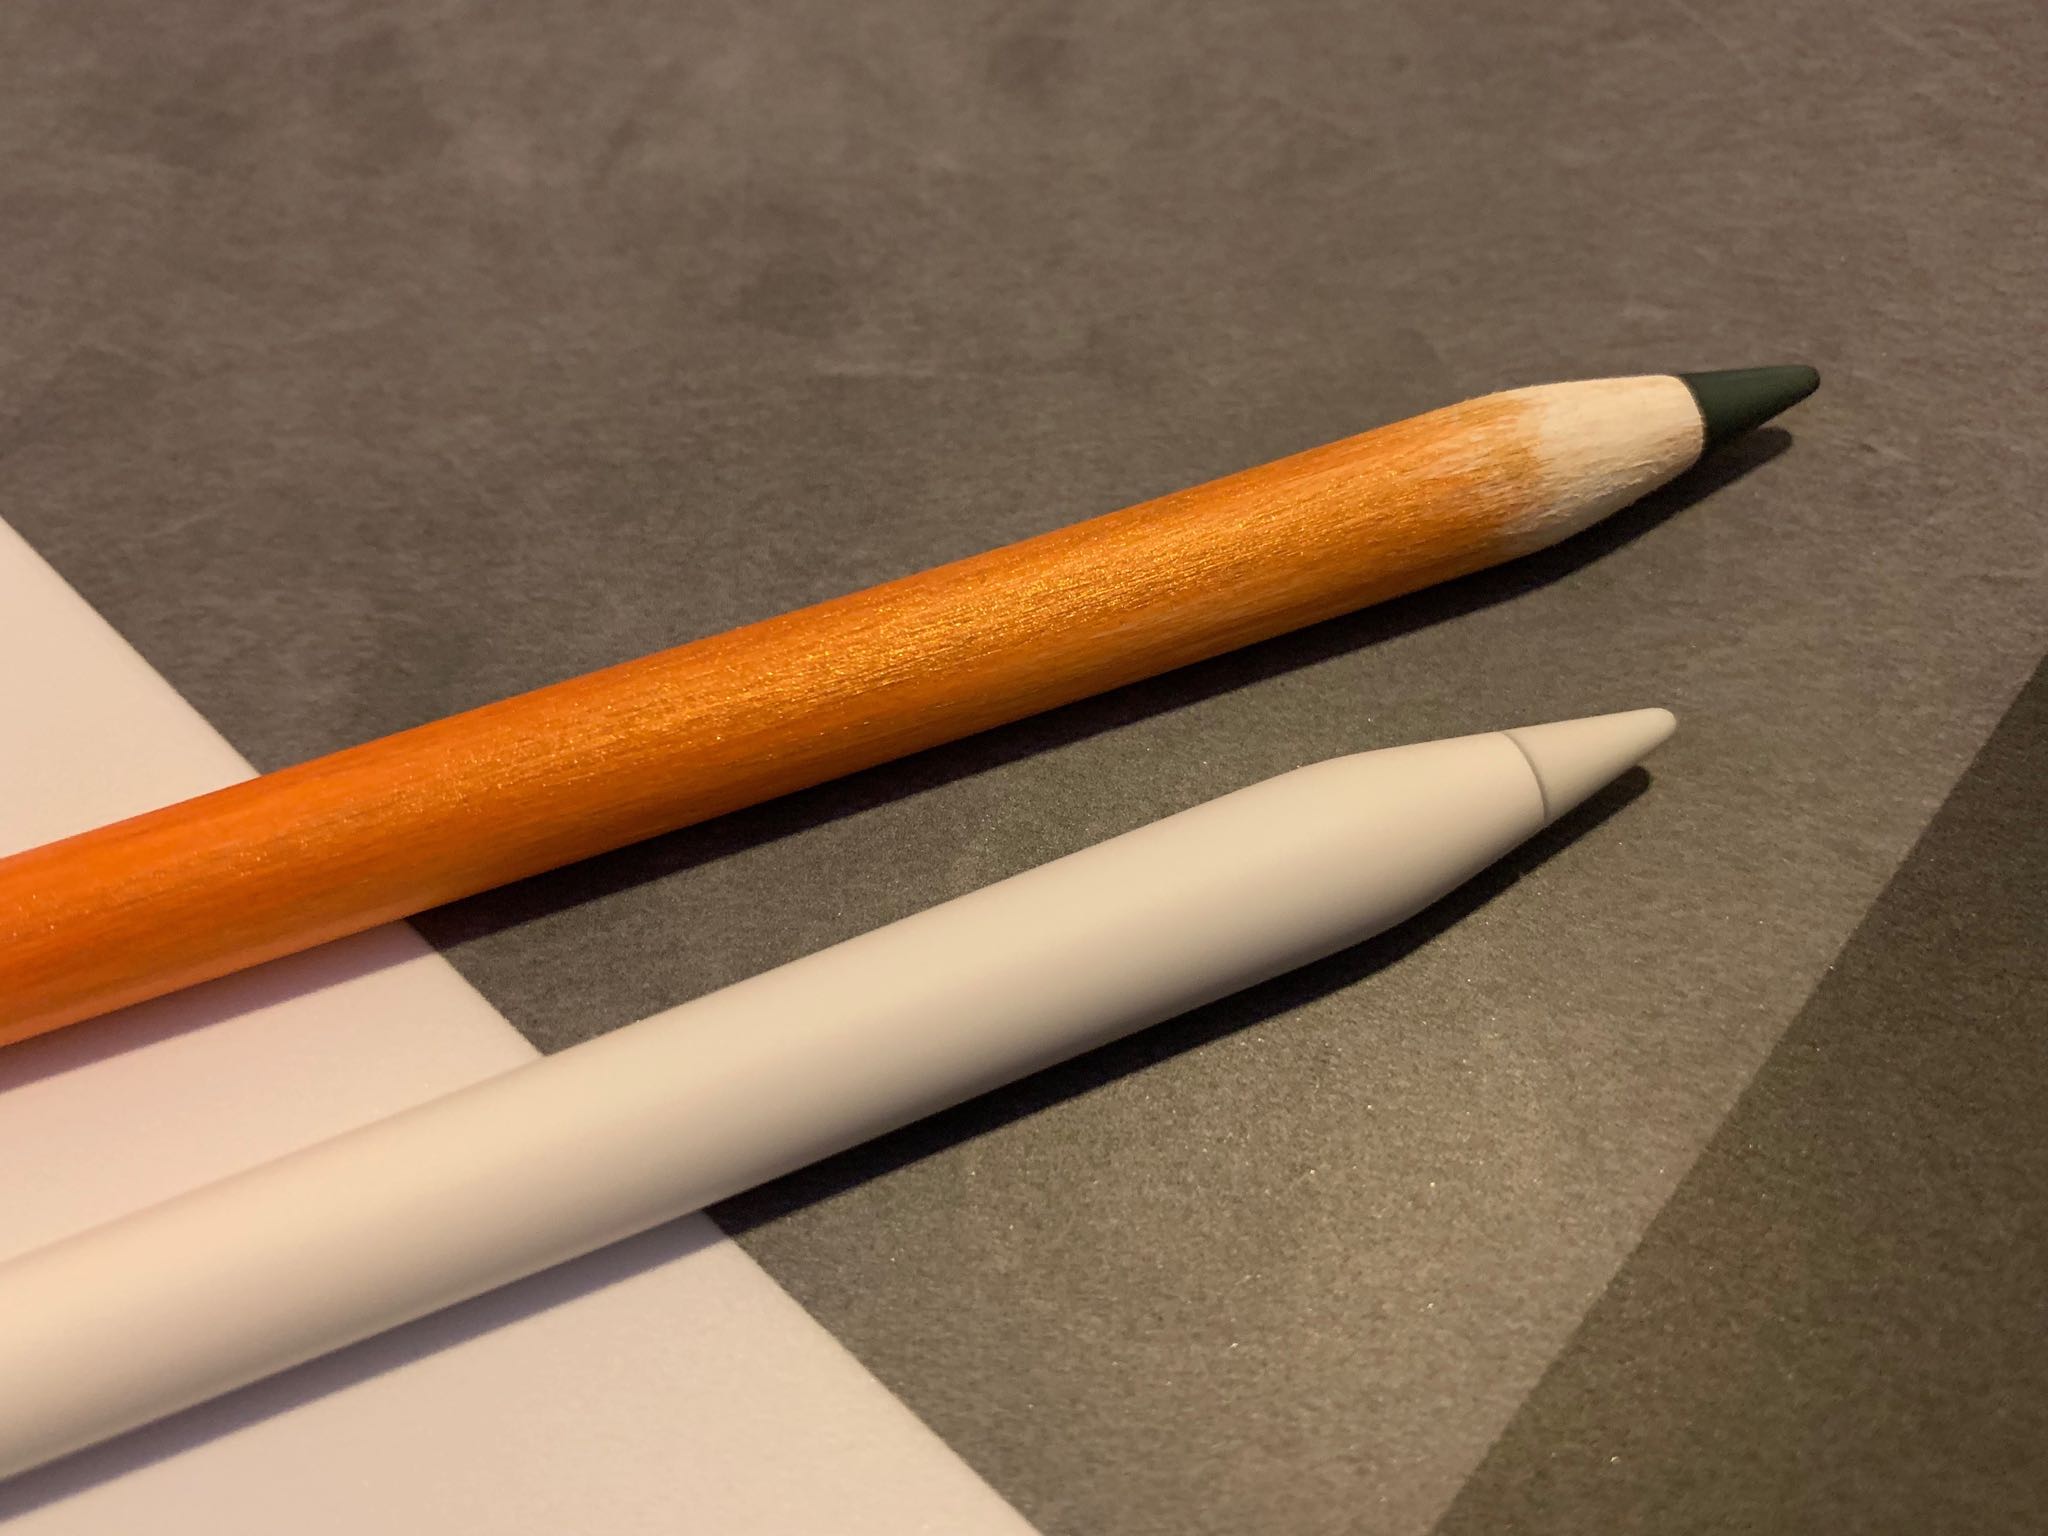 Pencil Pro can help you reimagine what’s possible with your iPad’s Apple Pencil 2